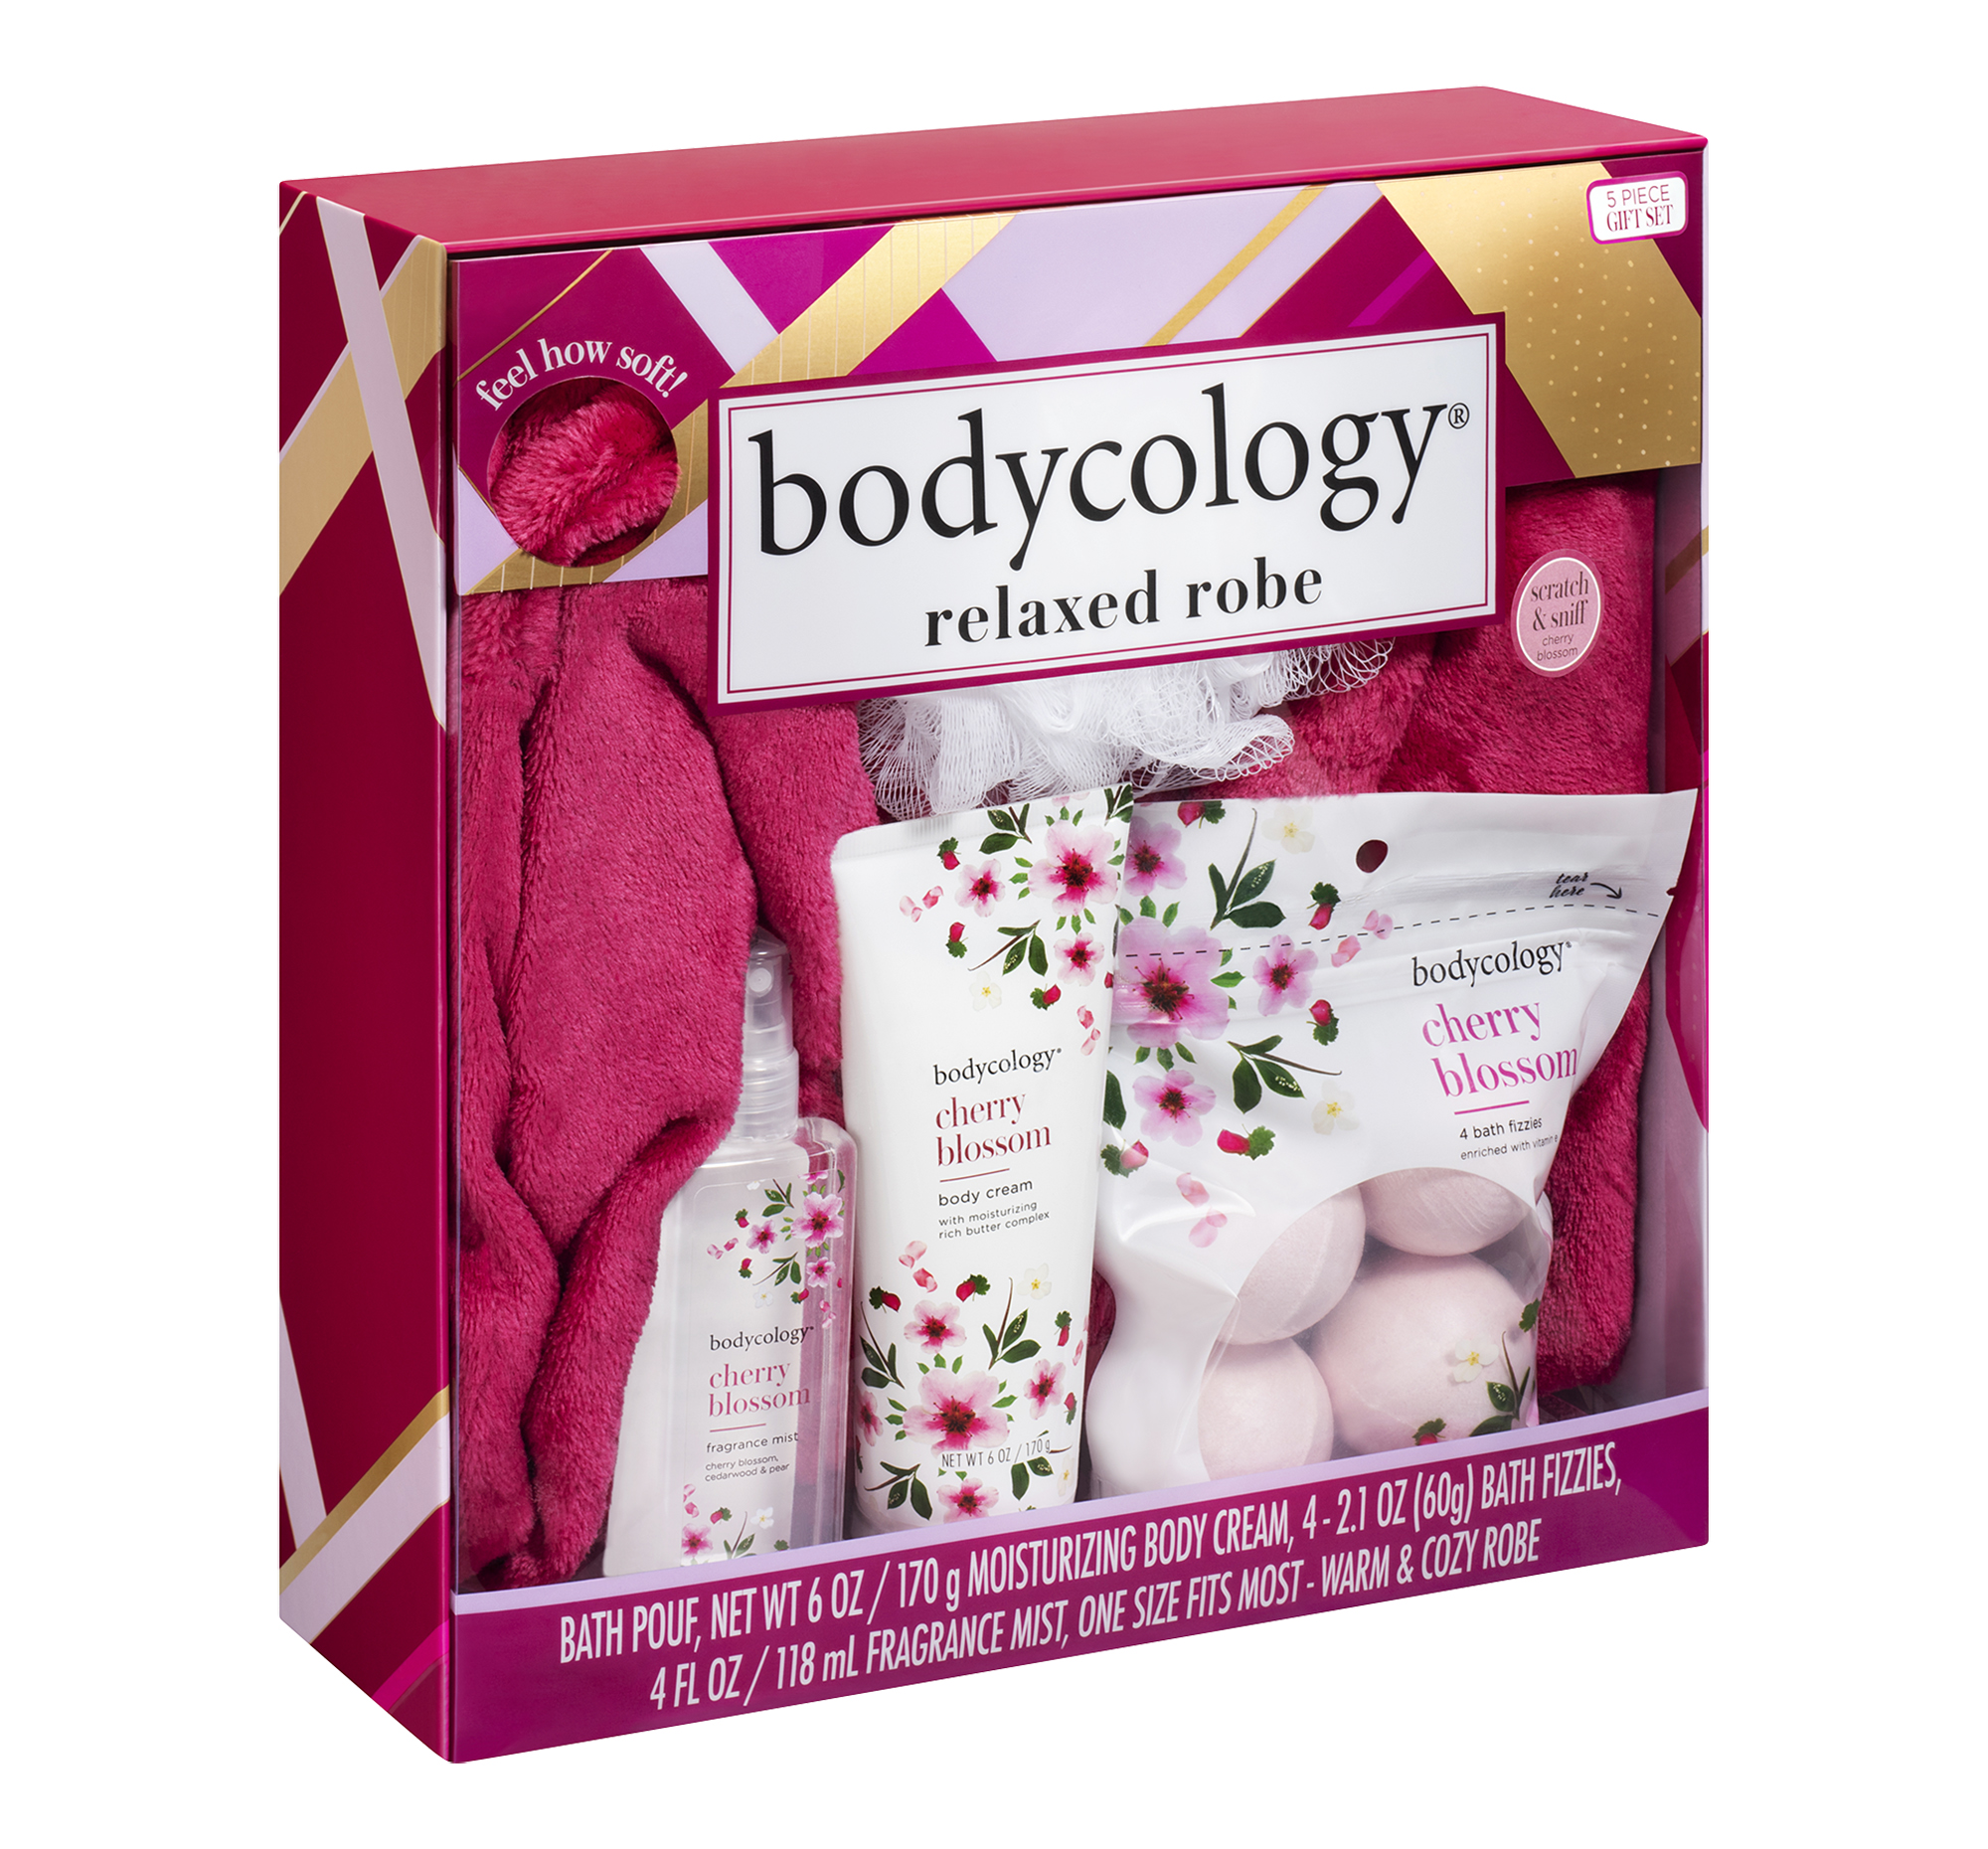 Bodycology Cherry Blossom Relaxed Robe Bath & Body Gift Set, 5 PC - image 4 of 6